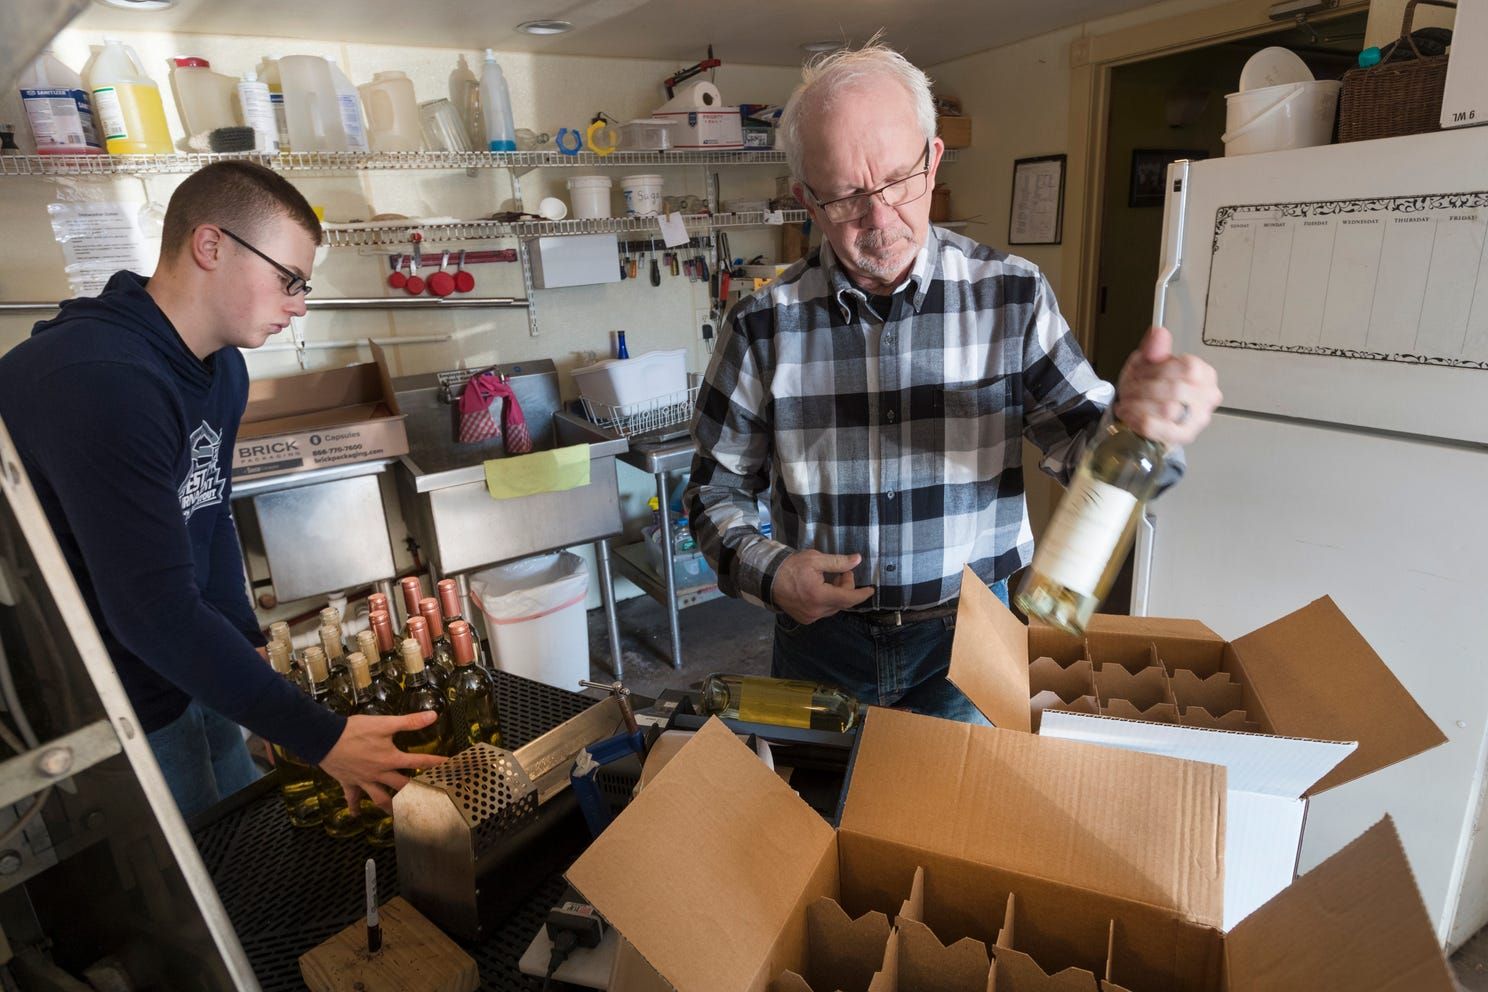 Tom Rohland fillls cases of wine with the help of Isaac Mathison, left, at the Munson Bridge Winery in Withee. Image by Mark Hoffman. United States, 2019.